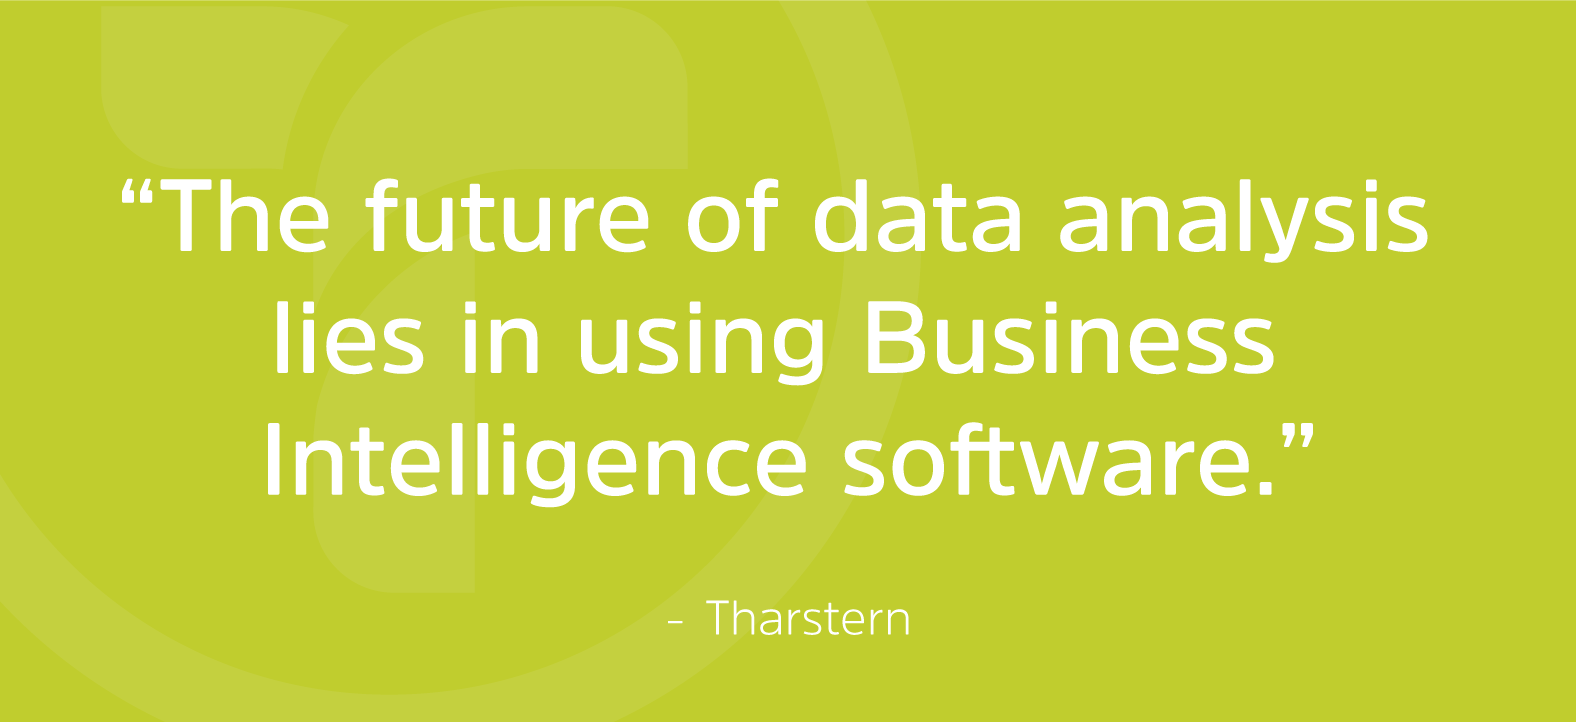 Th-future-of-data-anlysis-quote